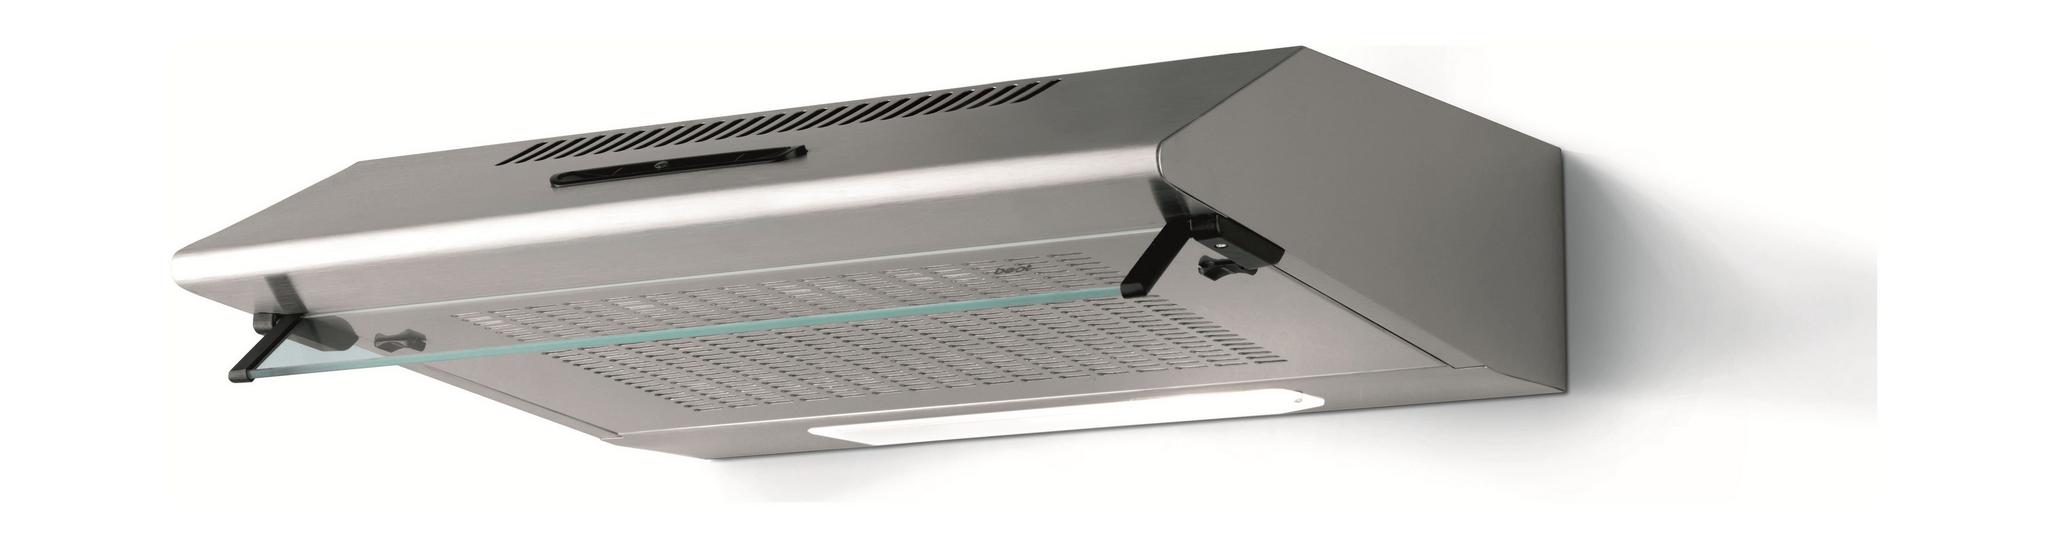 Lagermania 90x60cm 5-burner Gas Cooker and Oven + Lagermania 90 x 60 Cooker Hood Stainless Steel